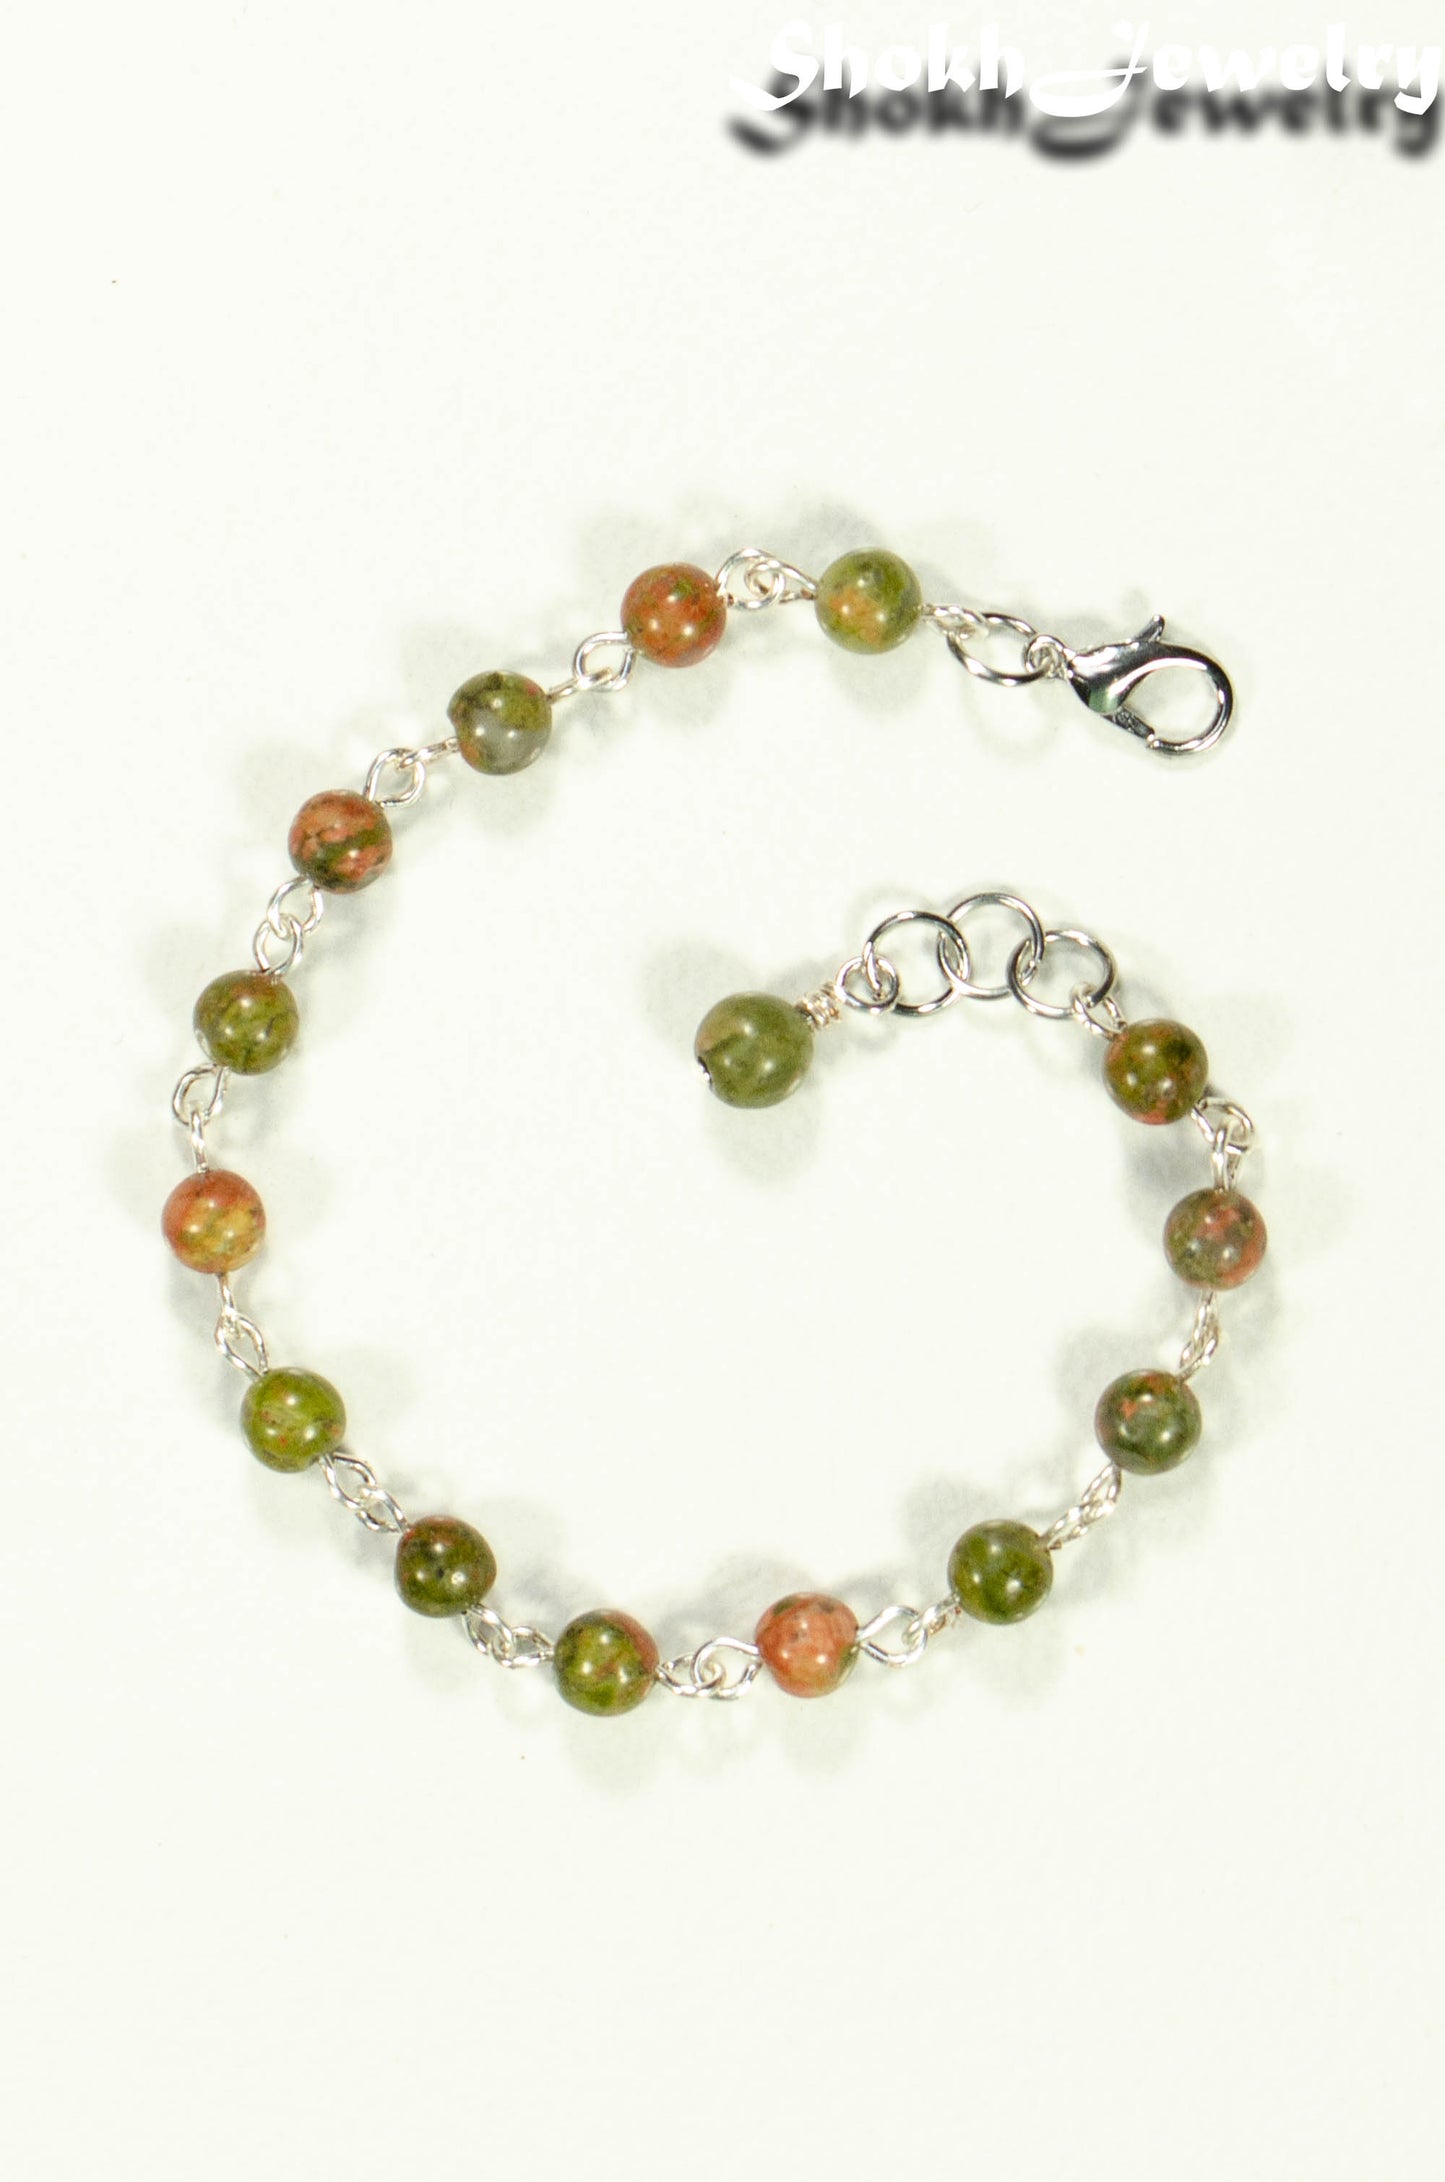 Top view of 6mm Unakite Jasper Link Bracelet with clasp.